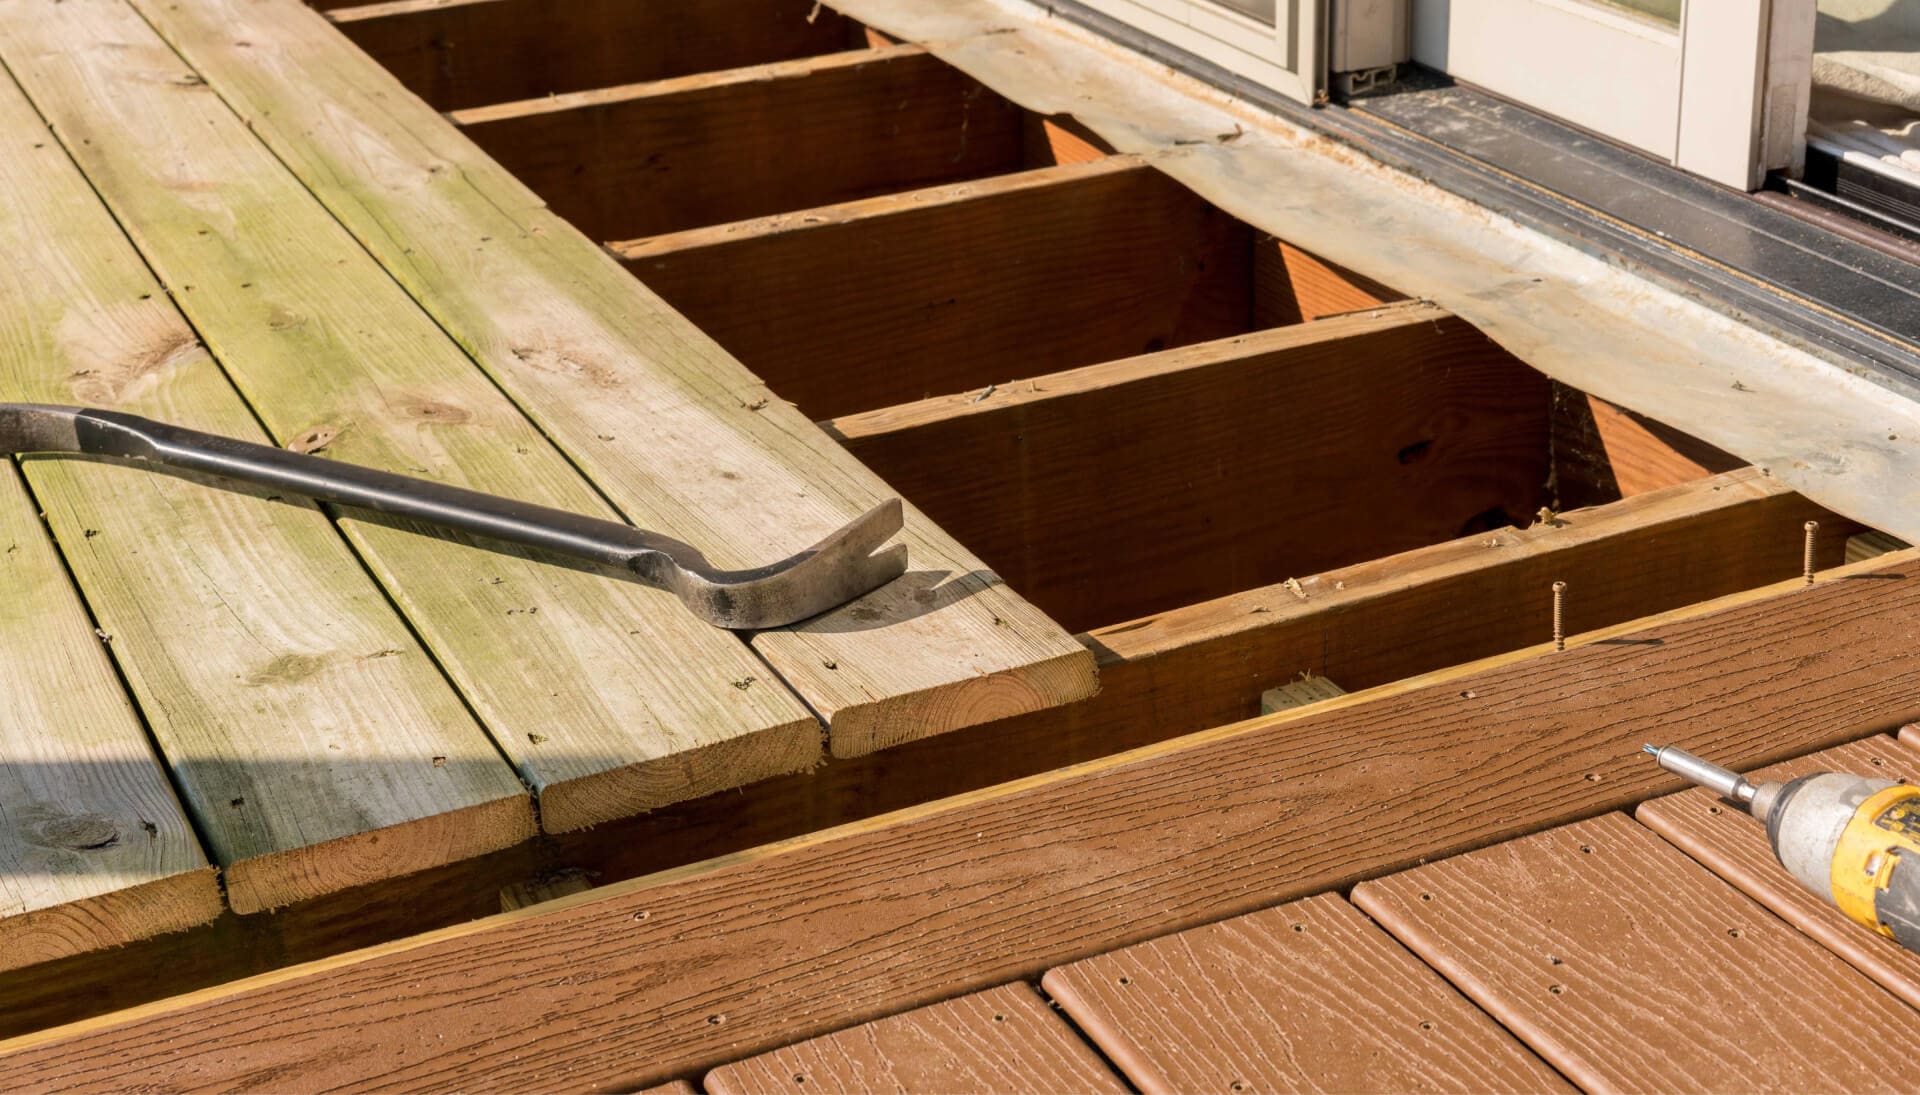 We offer the best deck repair services in York, Pennsylvania